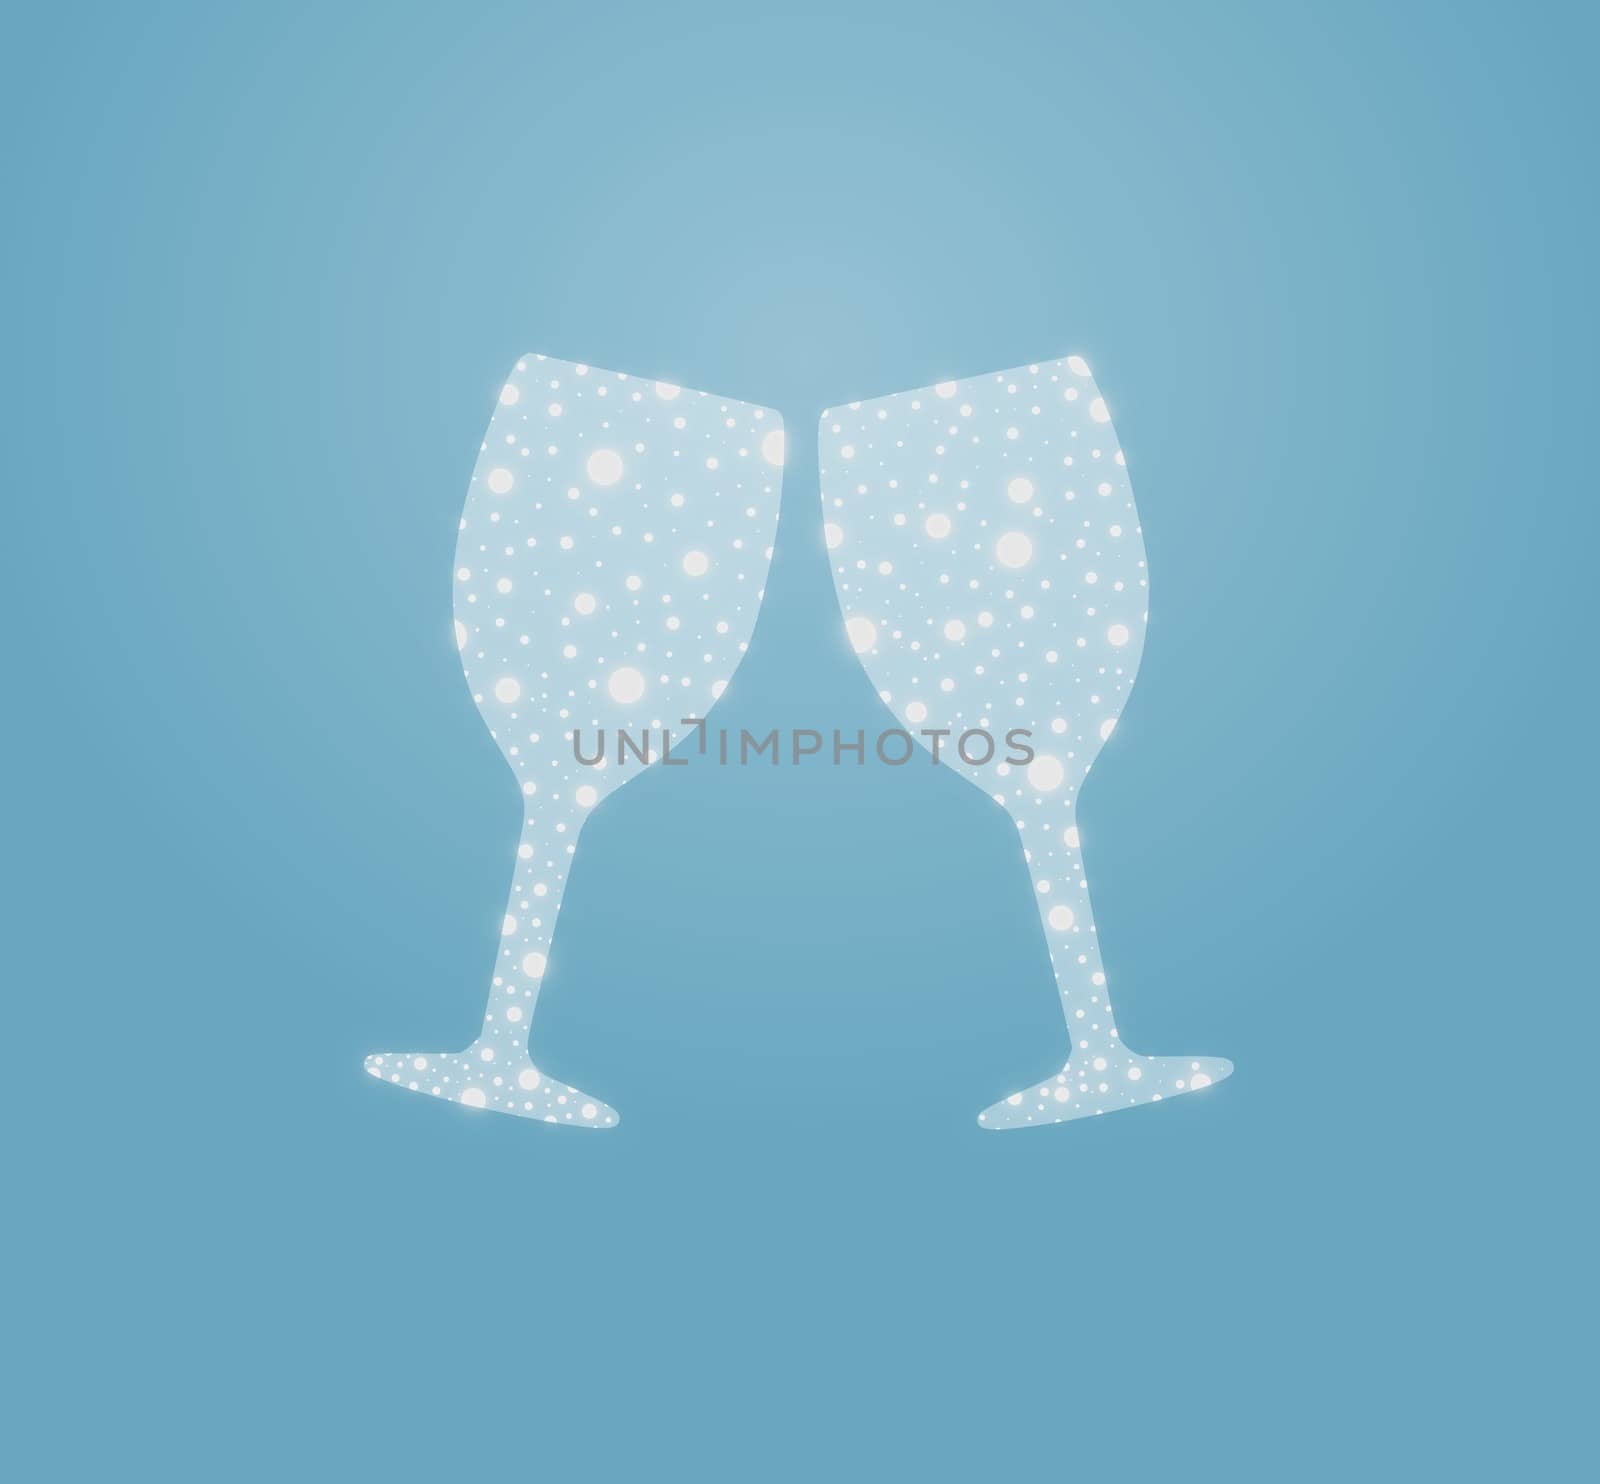 Illustration of two abstract wine glasses